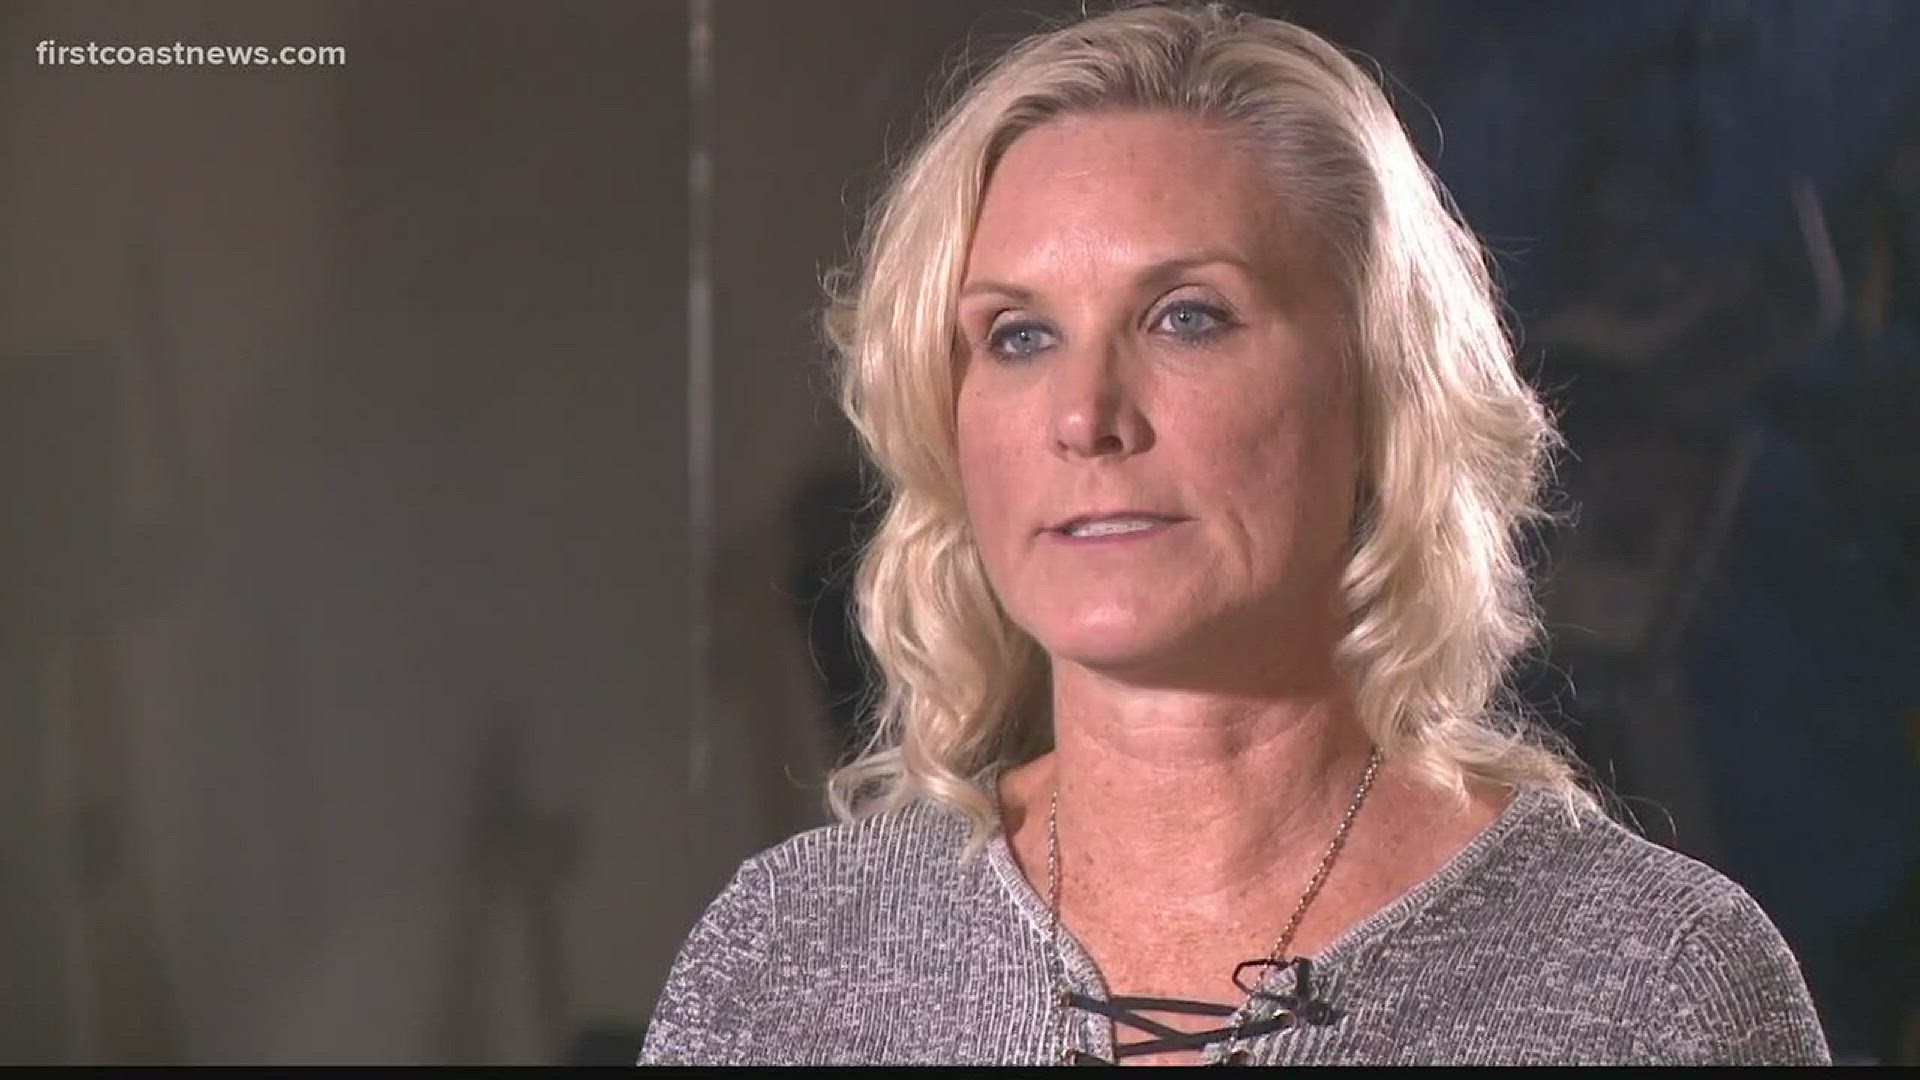 The truth will set you free Jacksonville volleyball coach encourages more women to come forward firstcoastnews picture